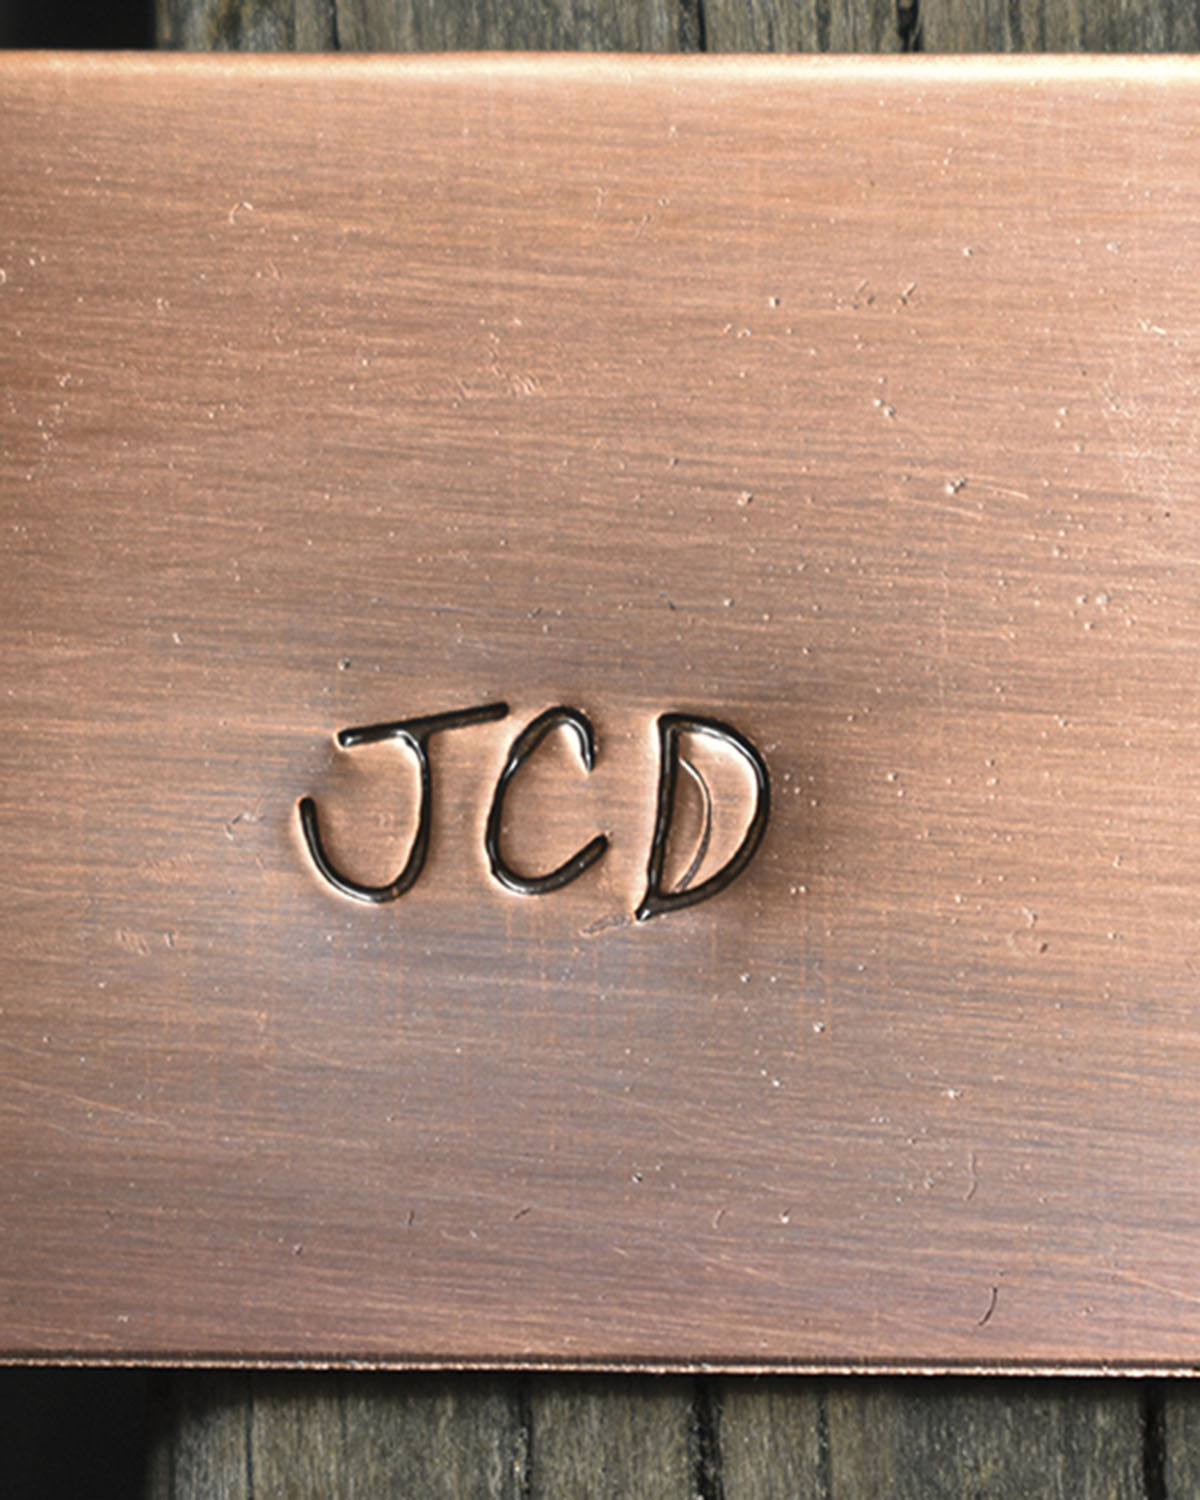 The letters JCD, the initials of a Bevolo craftsman, inscribed in brass